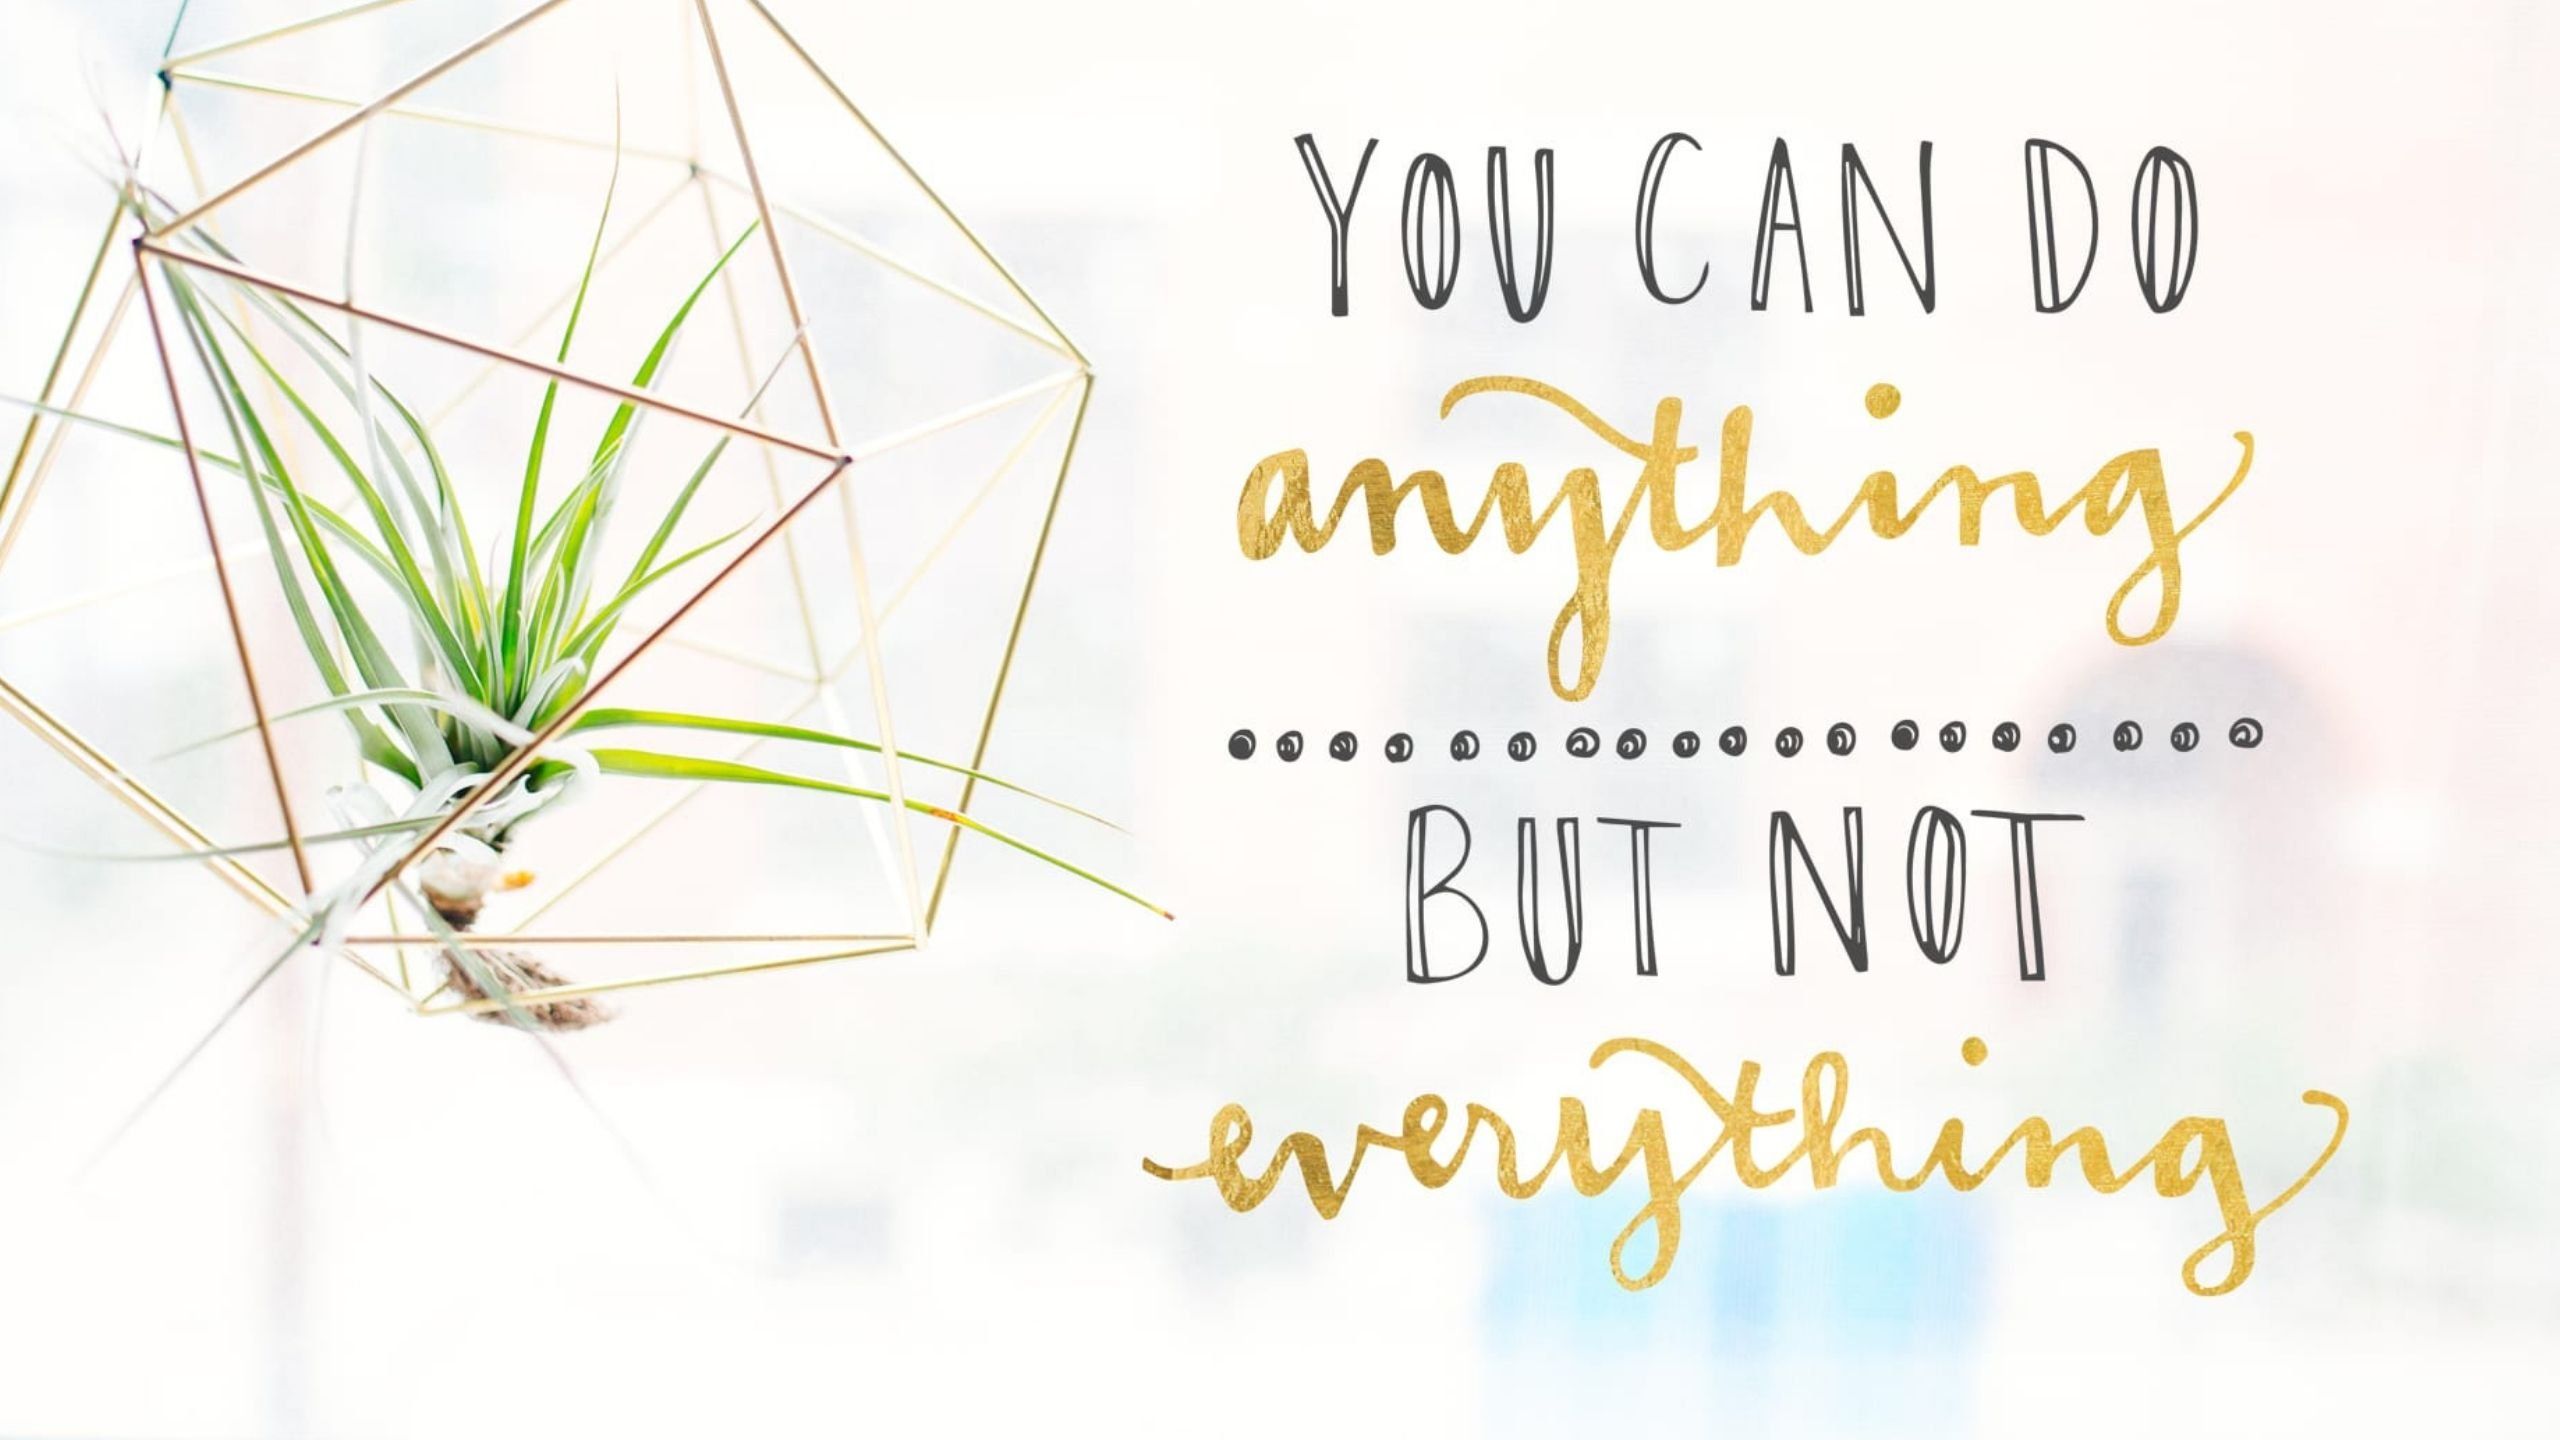 You can do anything, but not everything”